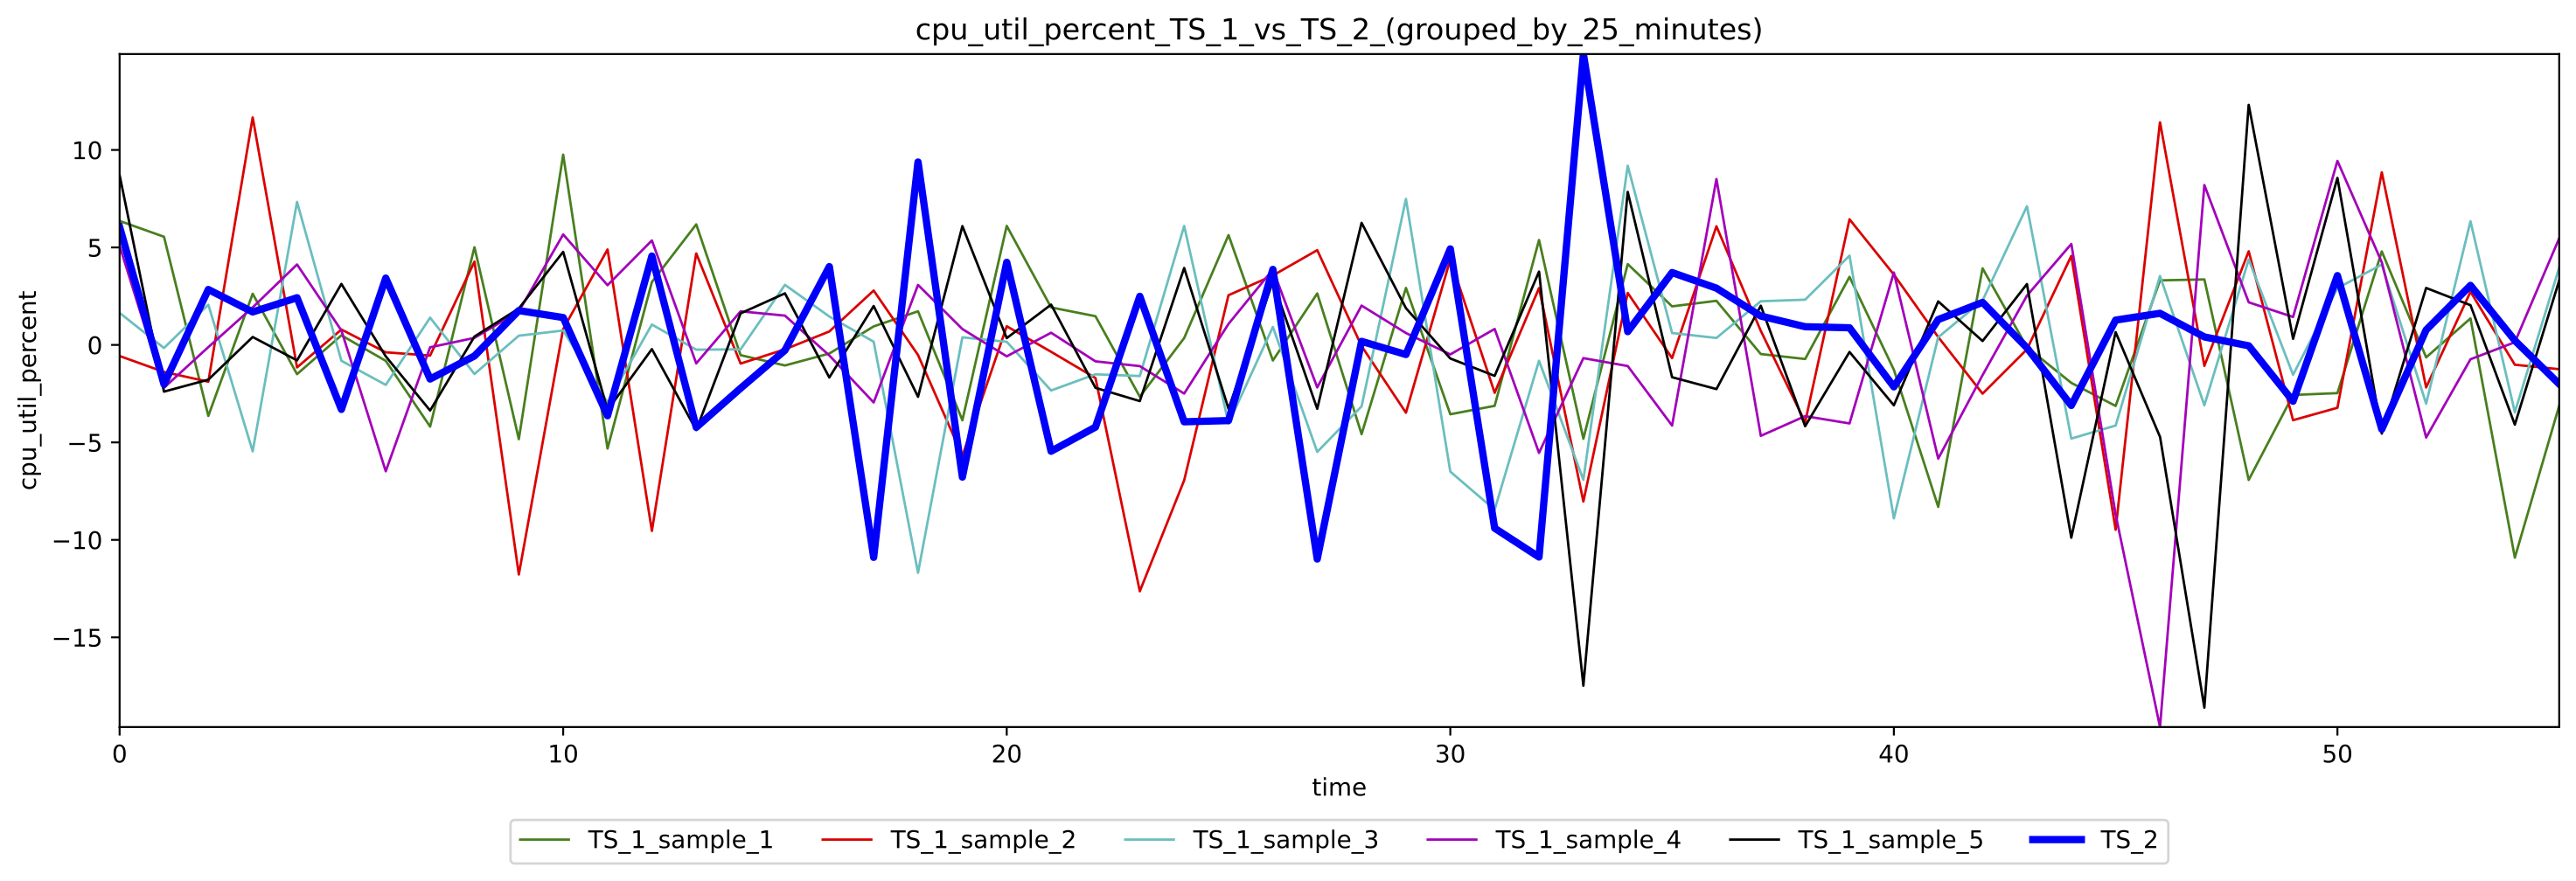 Delta Figure for used CPU percentage grouped by 25 minutes